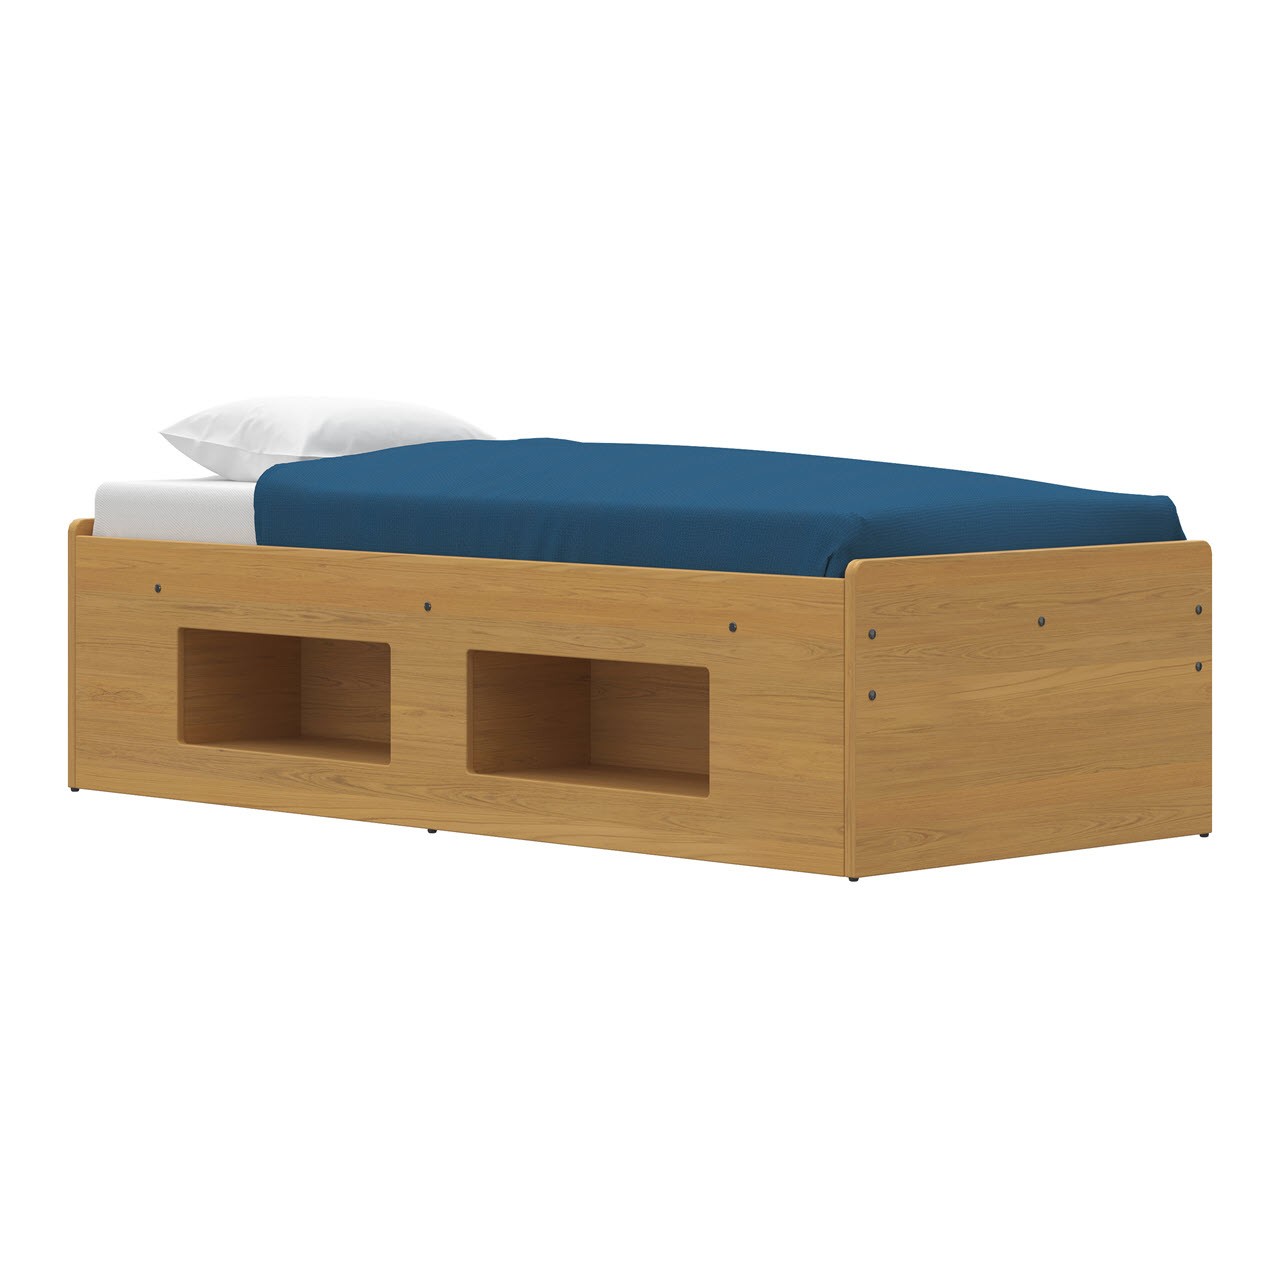 Fortress Steel Frame Bed Cubby, Cubby Bed Frame